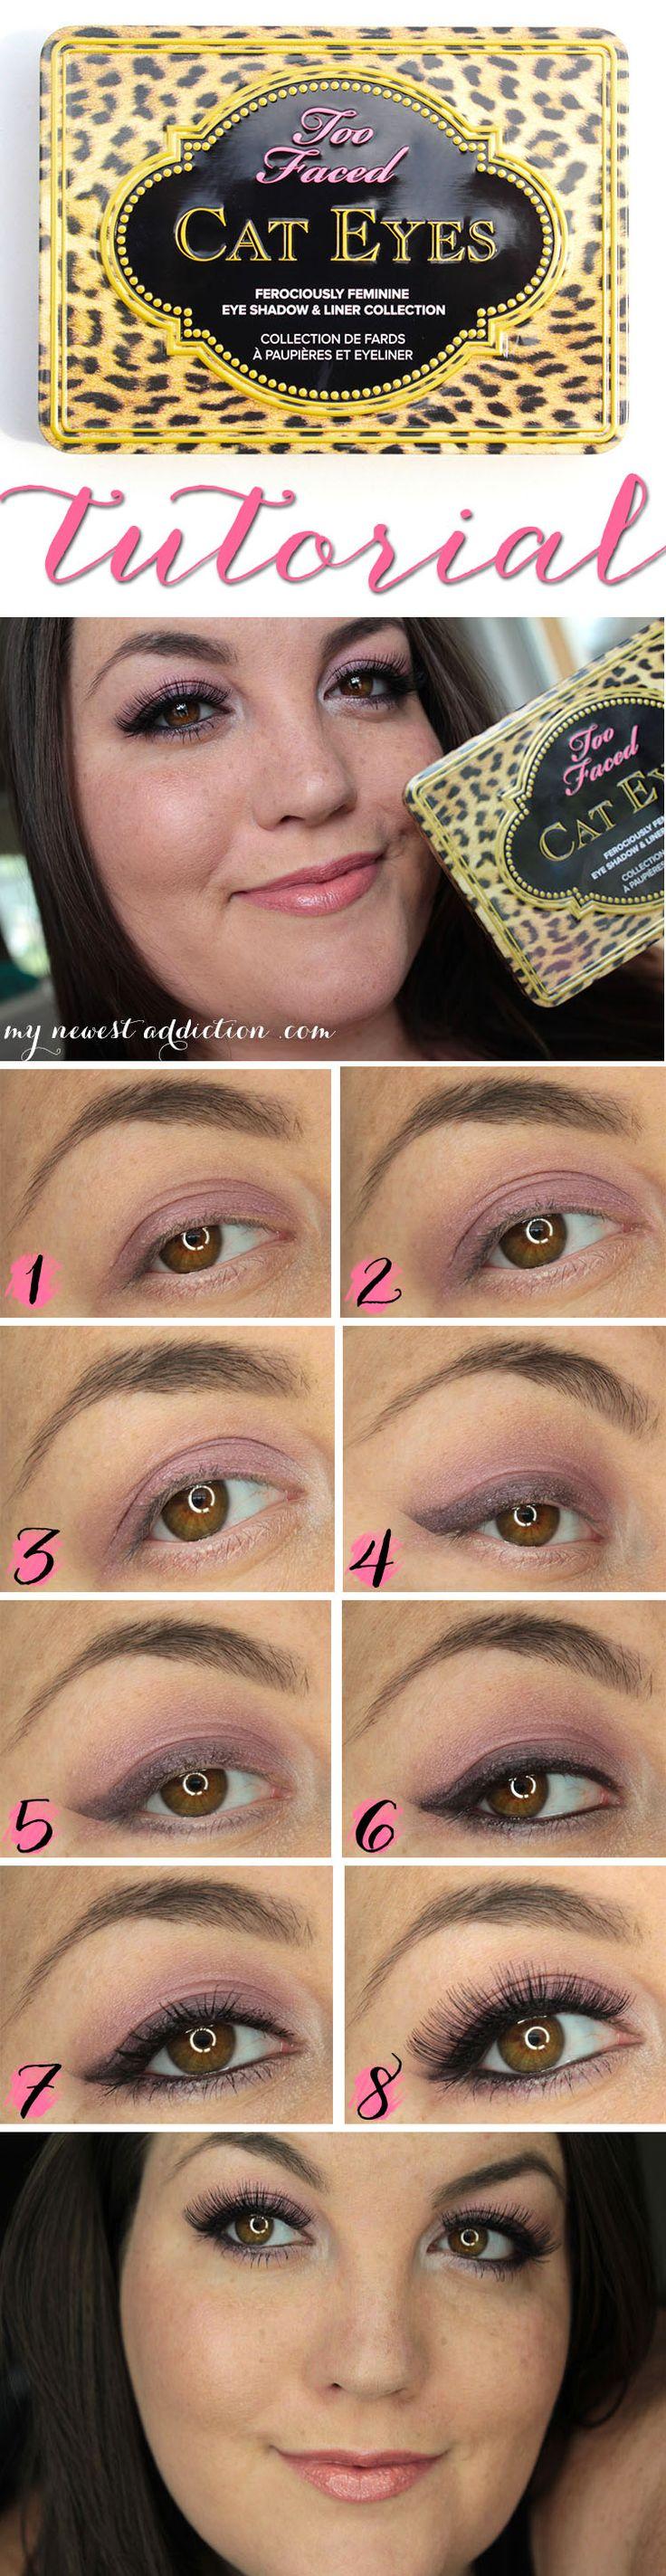 Wedding - Too Faced Cat Eyes Palette